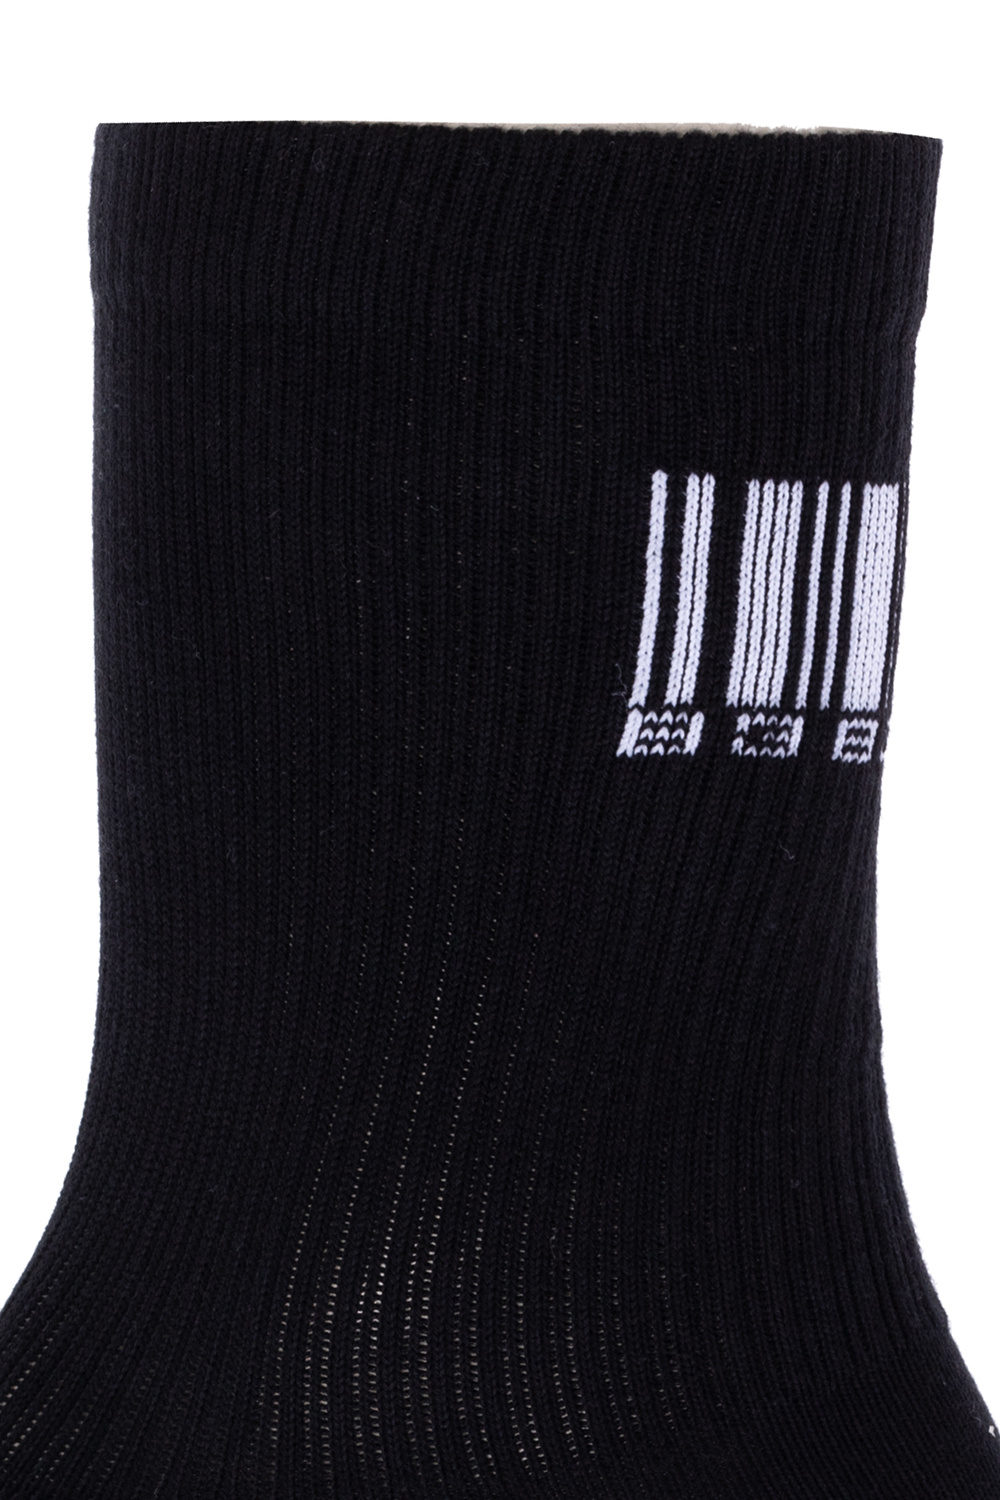 VTMNTS Socks with barcode embroidery | Men's Clothing | Vitkac